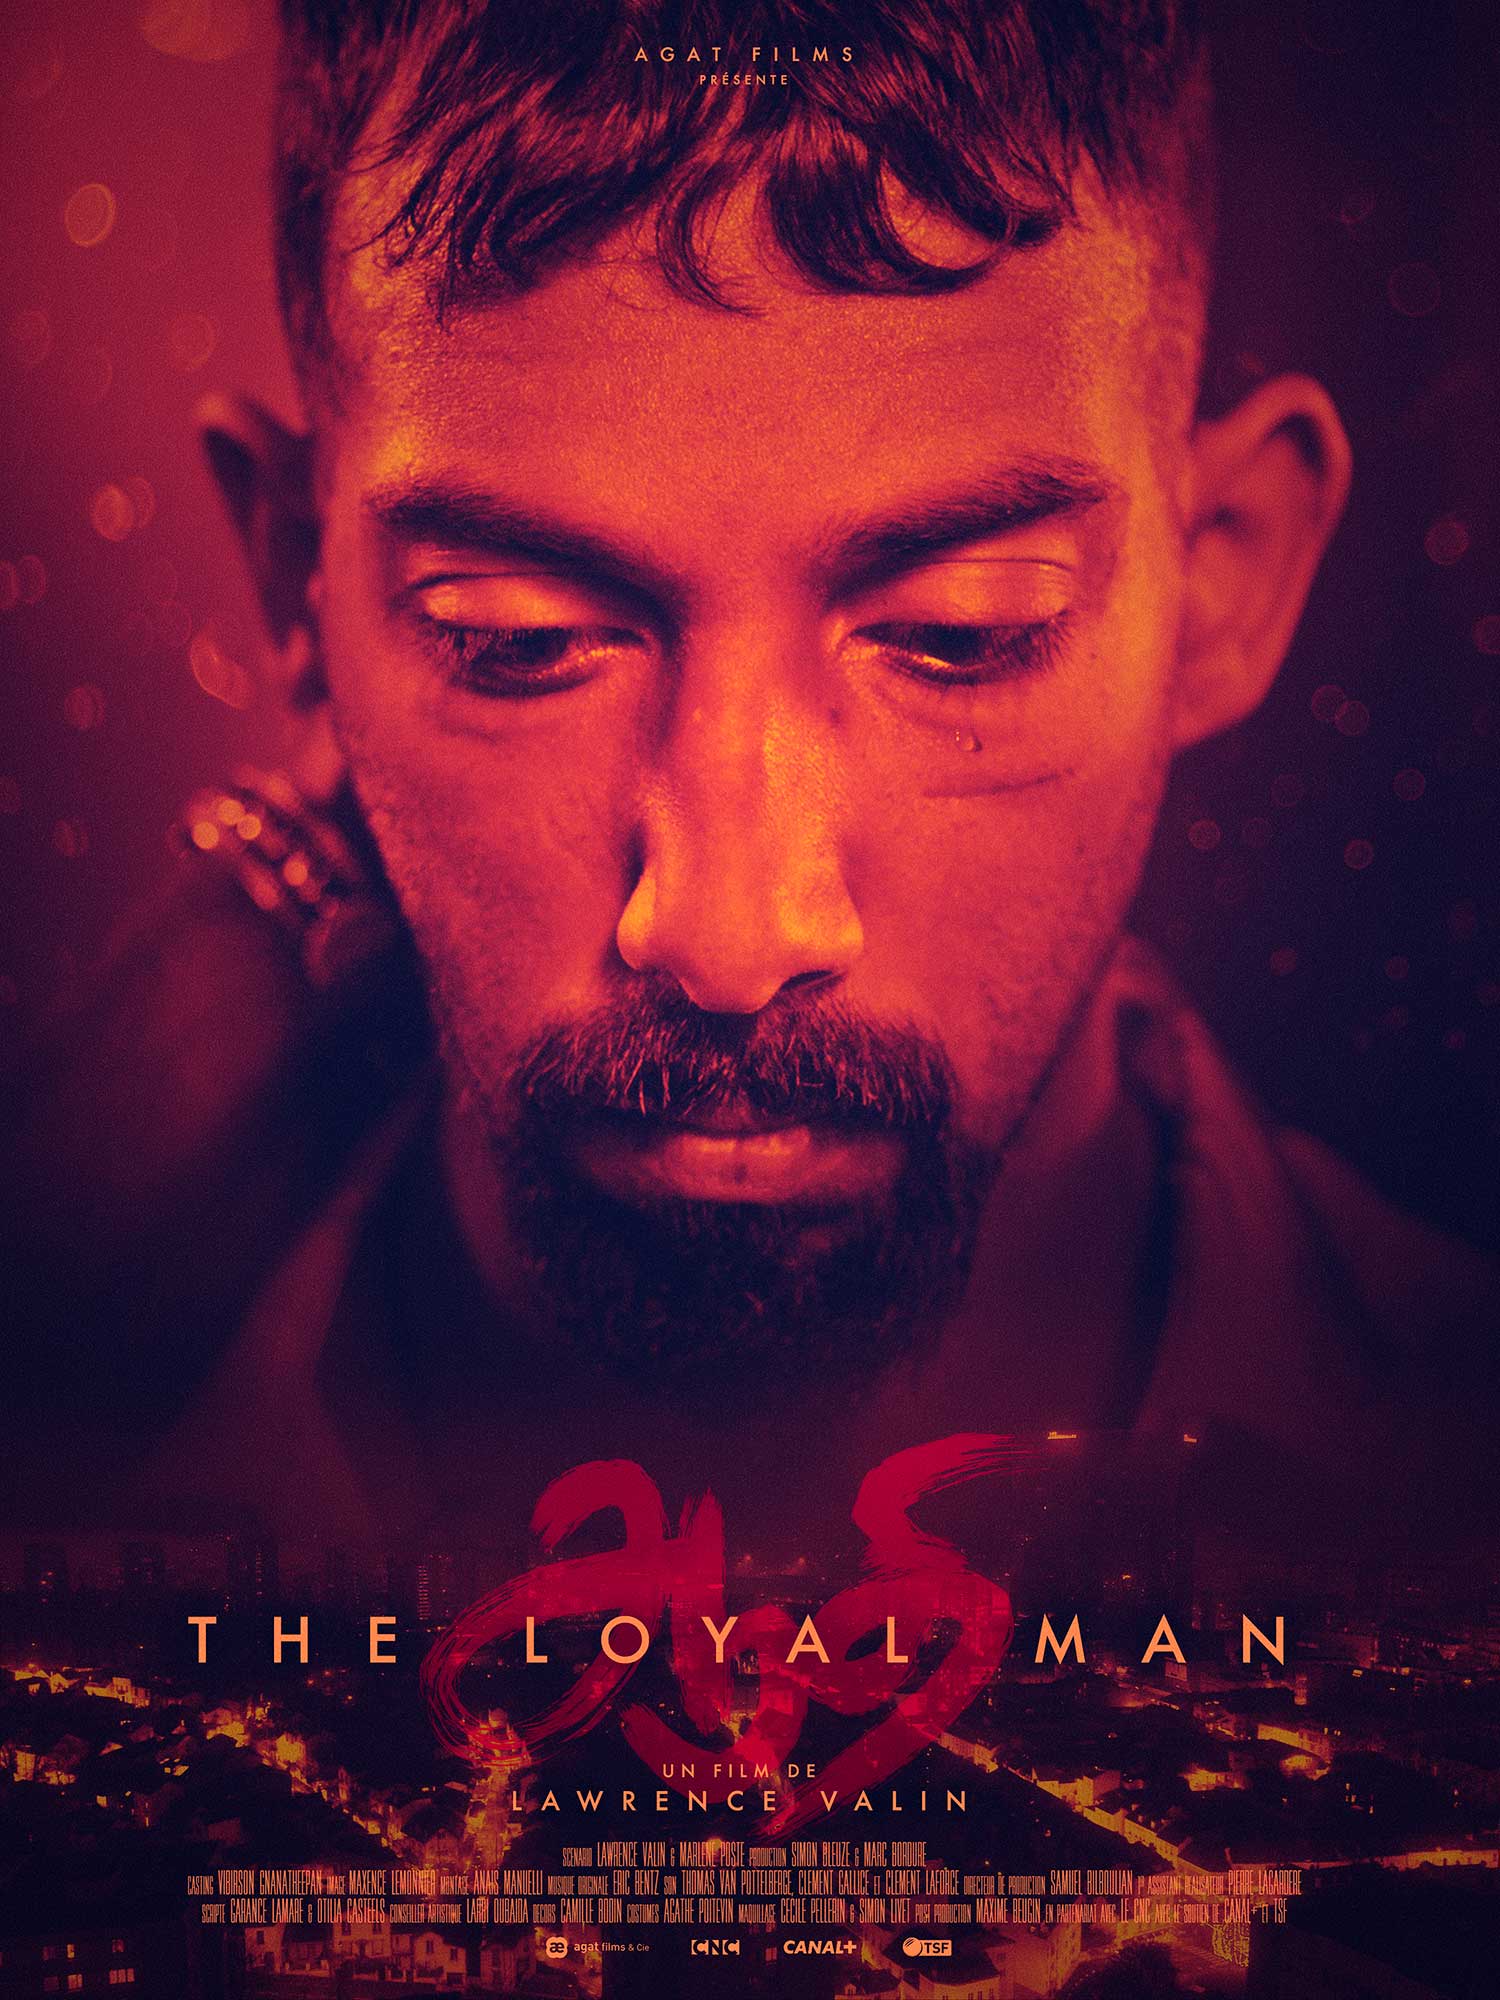 Poster for "The Loyal Man," showing a moody red-tinted photo of the main actor's face